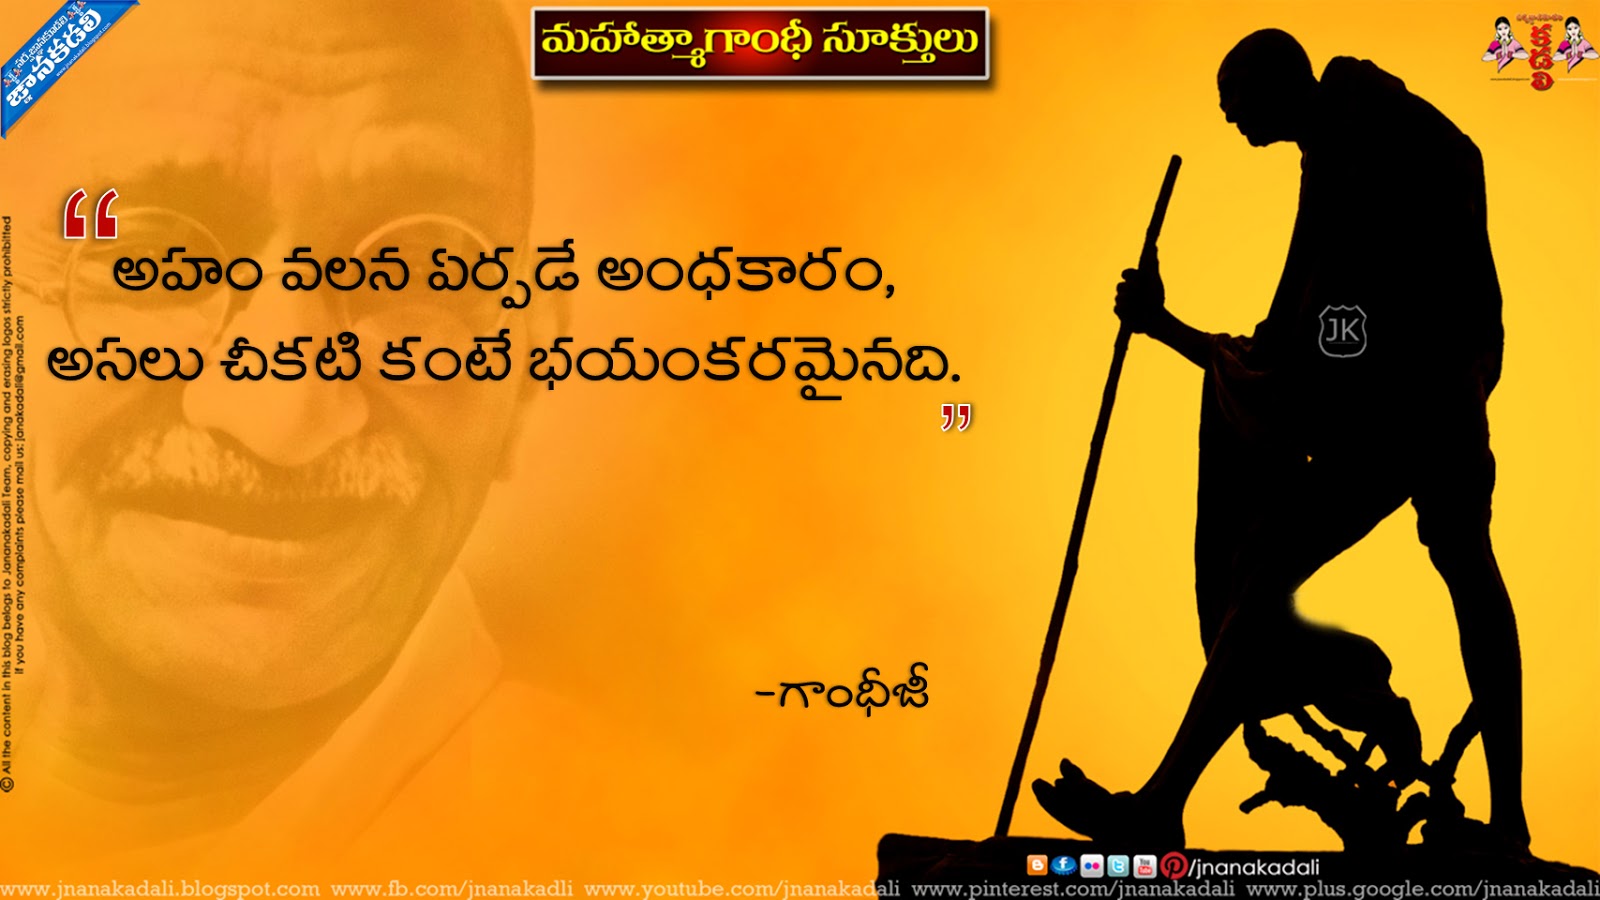 Inspiring Gandhi Sayings about Everything possible Nice Telugu Language Life Quotations and Messages Free Popular Gandhiji Telugu Quotes and Messages